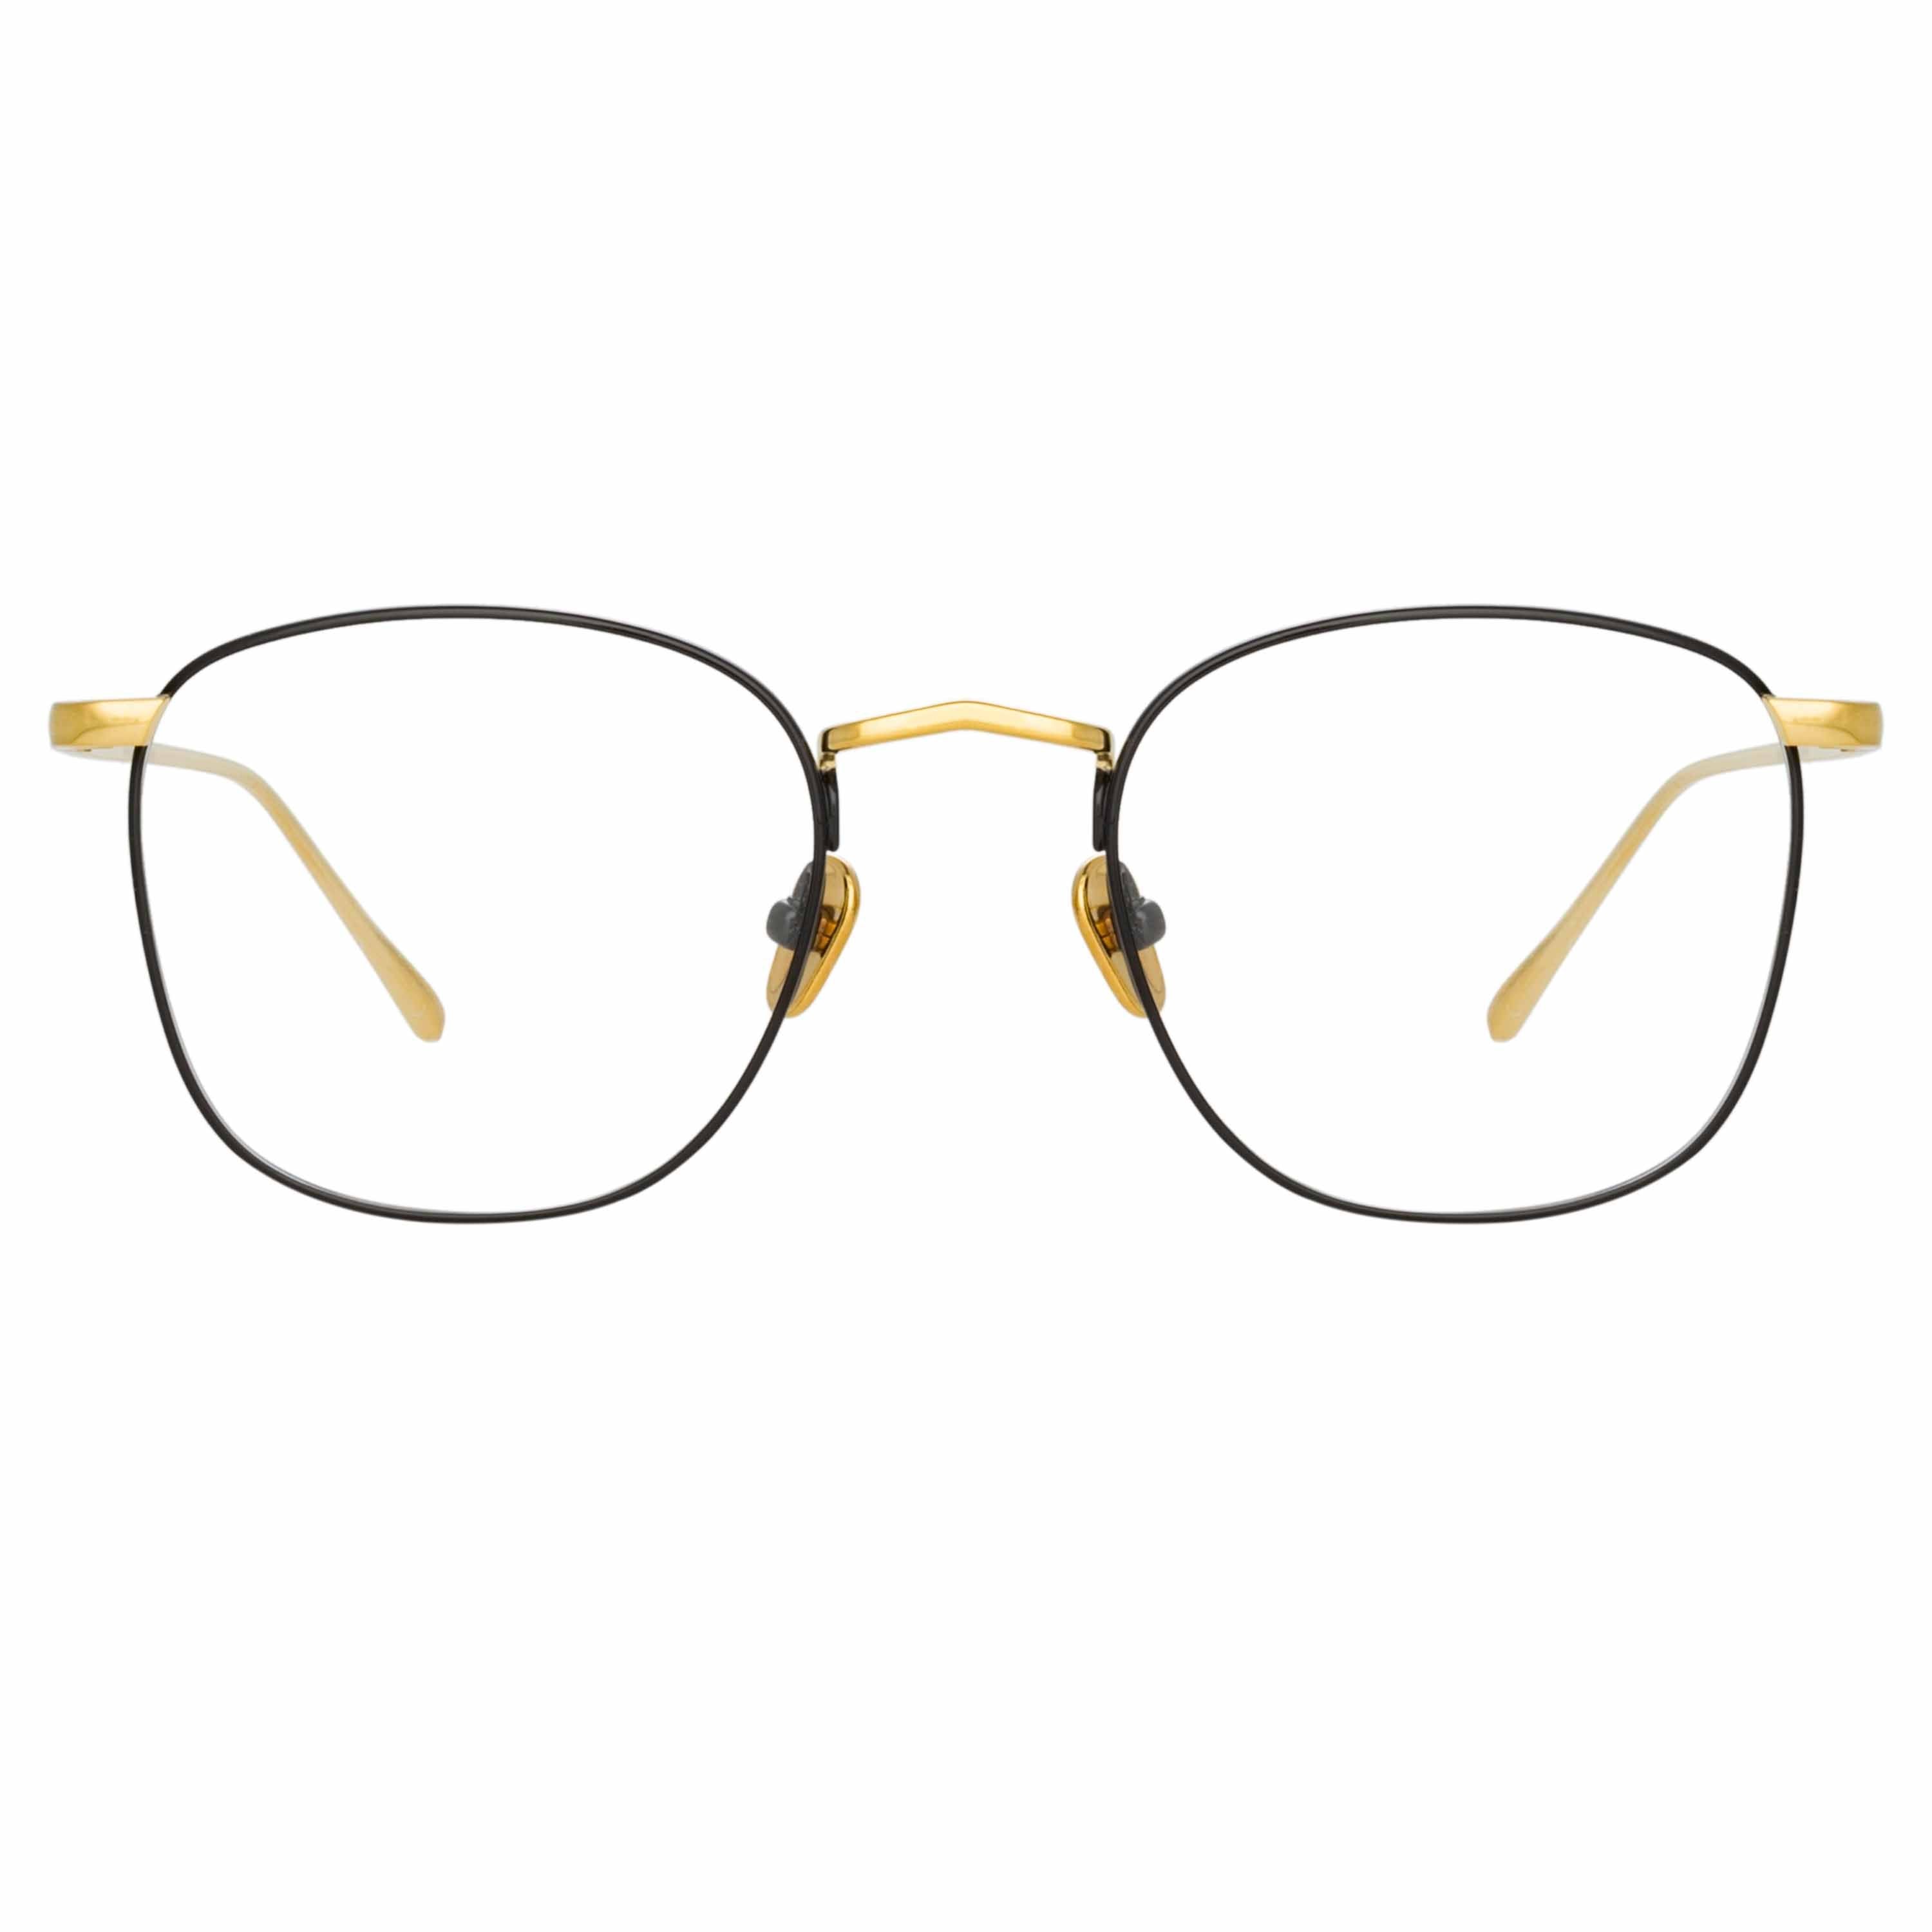 Square Optical Frame in Yellow Gold and Black (C18)